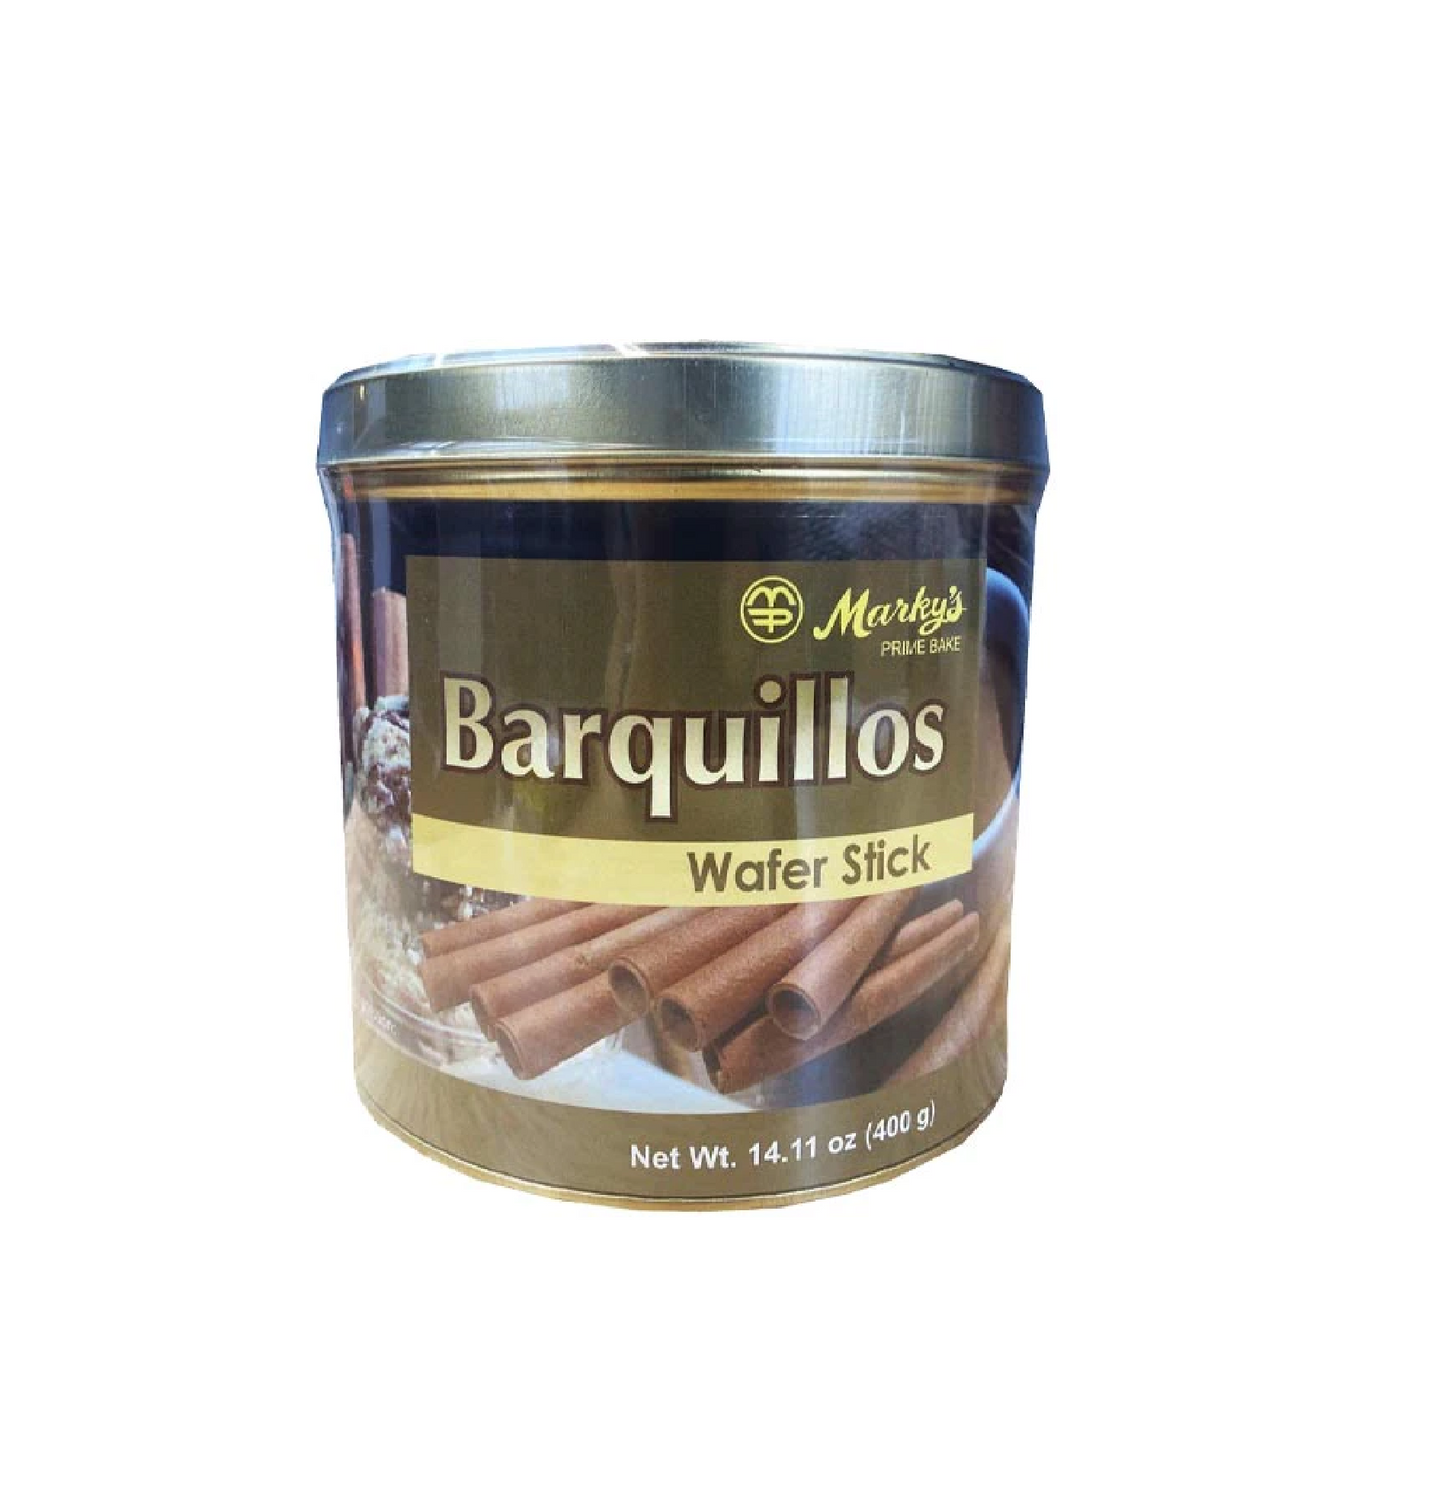 MARKY'S BARQUILLOS WAFER STICK 400g